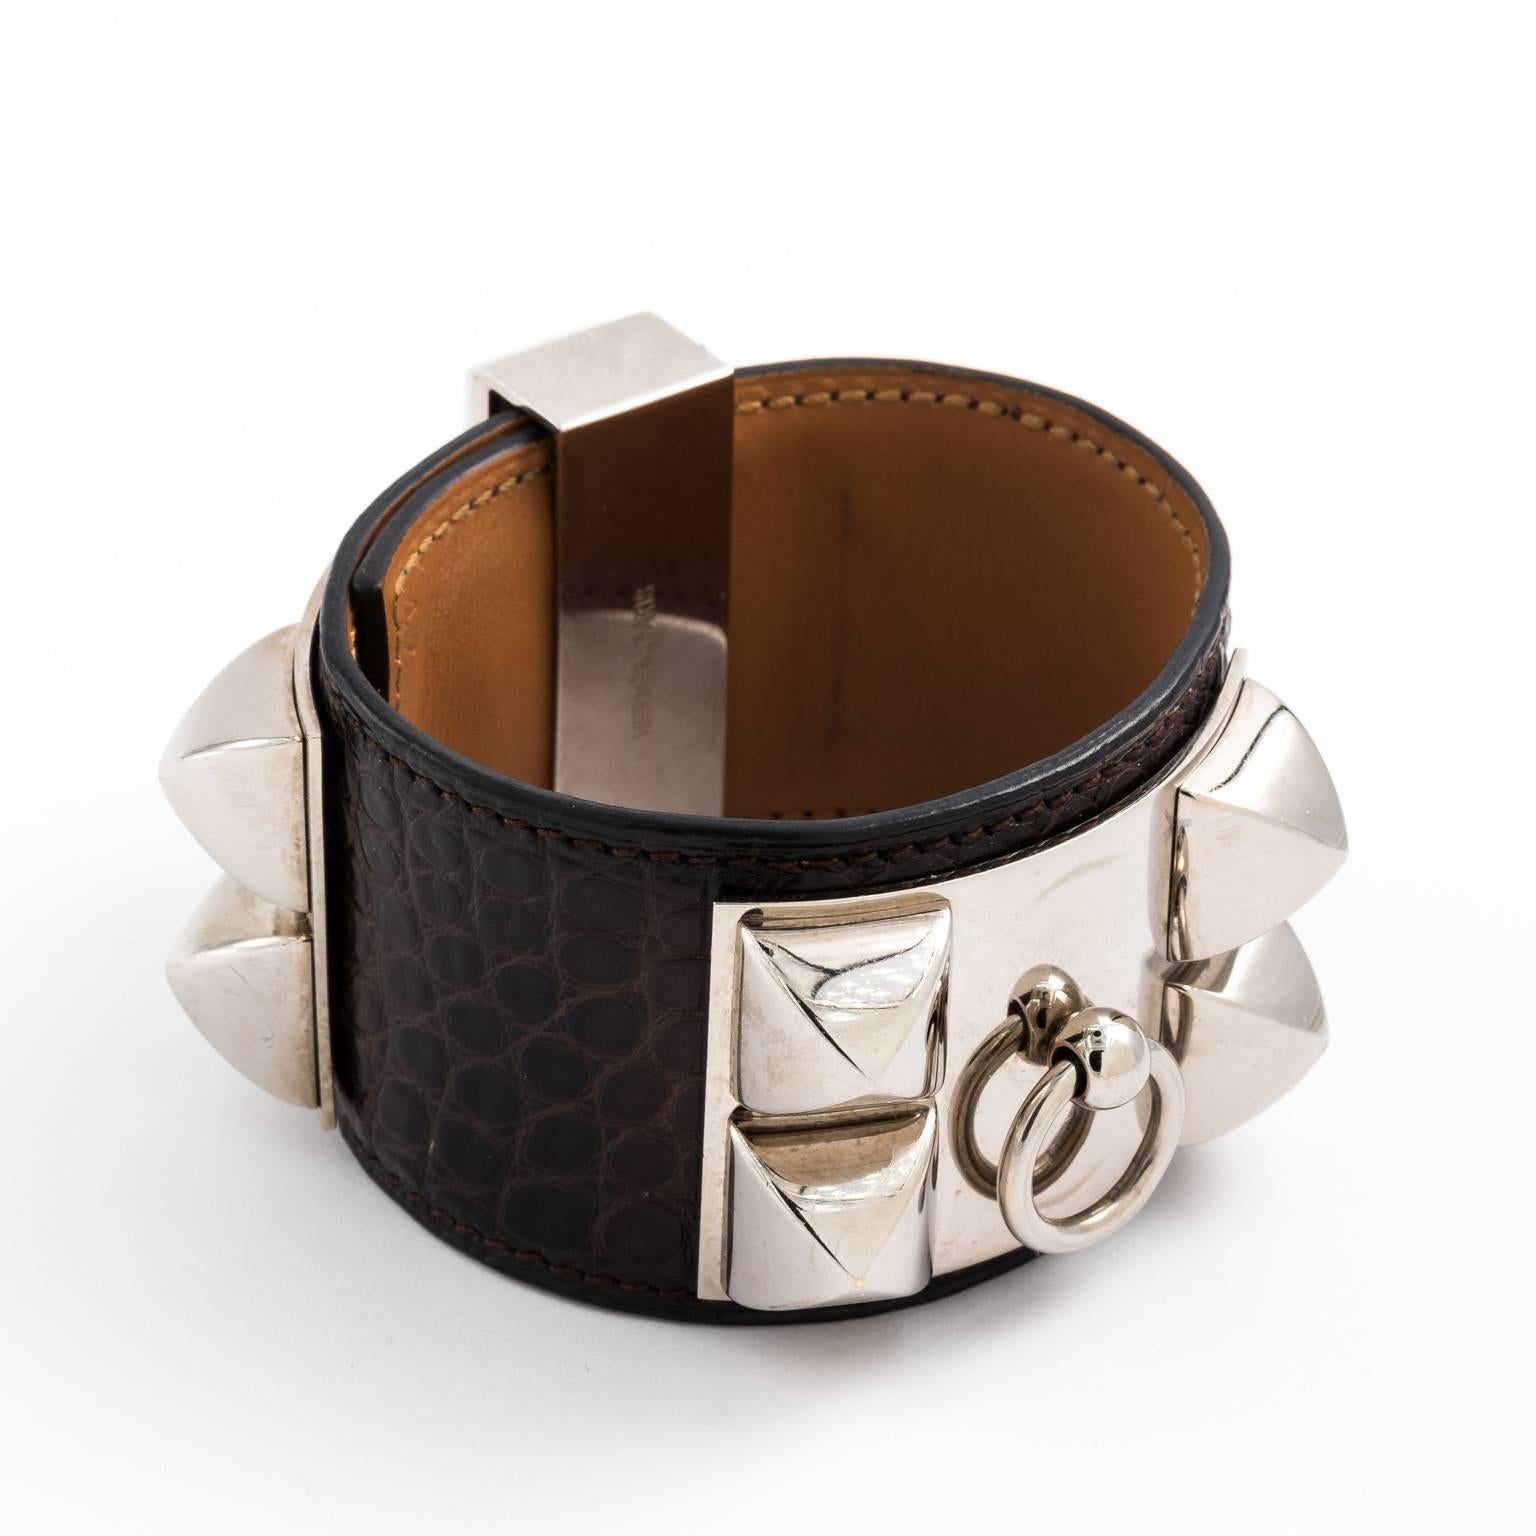 Contemporary Hermes Collier de Chien cuff bracelet that features a black alligator cuff with silver hardware. Size medium.
